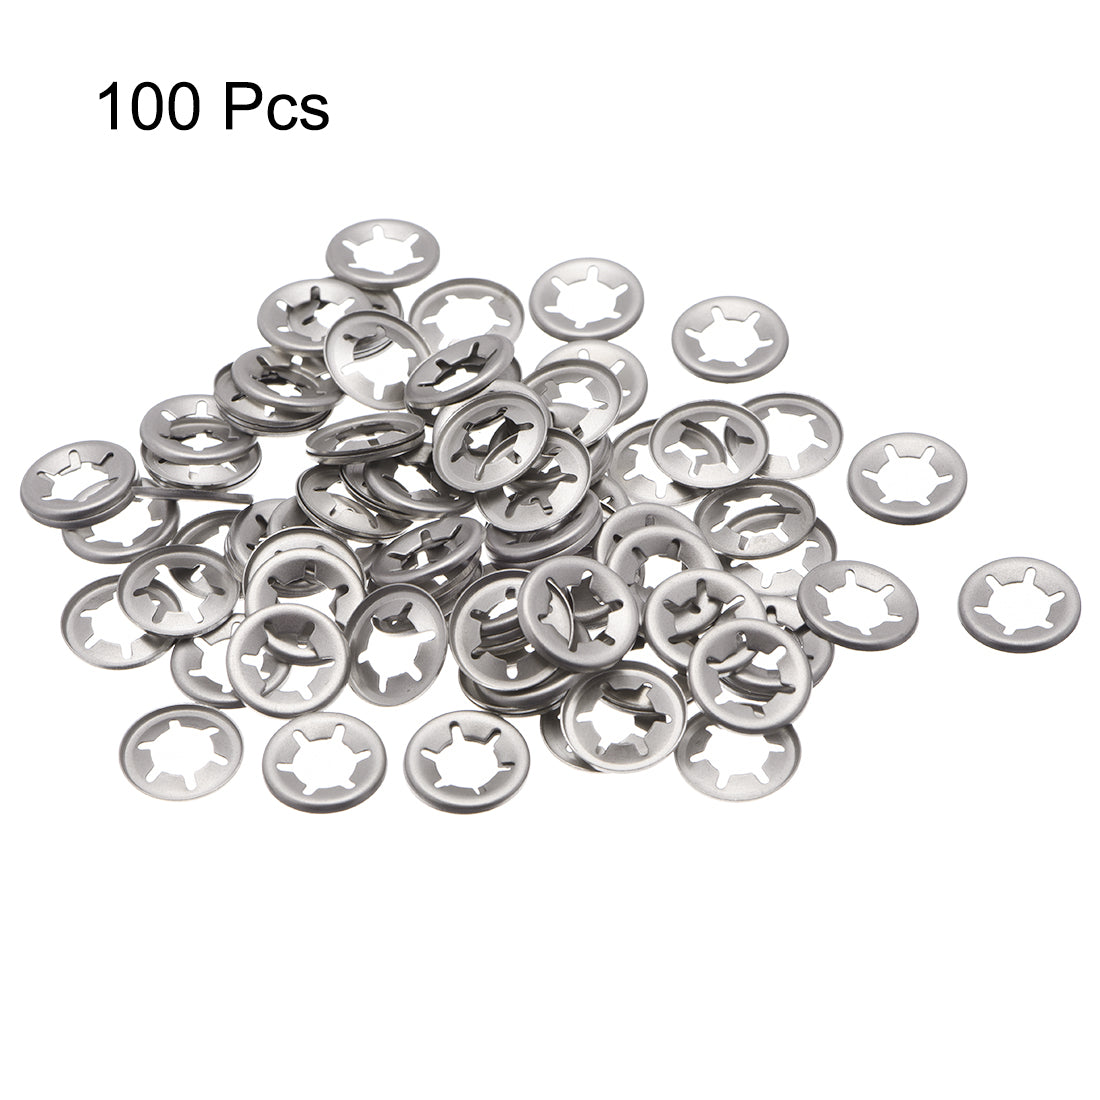 Uxcell Uxcell Star Locking Washers M5 x12 Internal Tooth Push On Locking Washers Clips Fasteners Assortment Kit Silver Tone 100 pcs